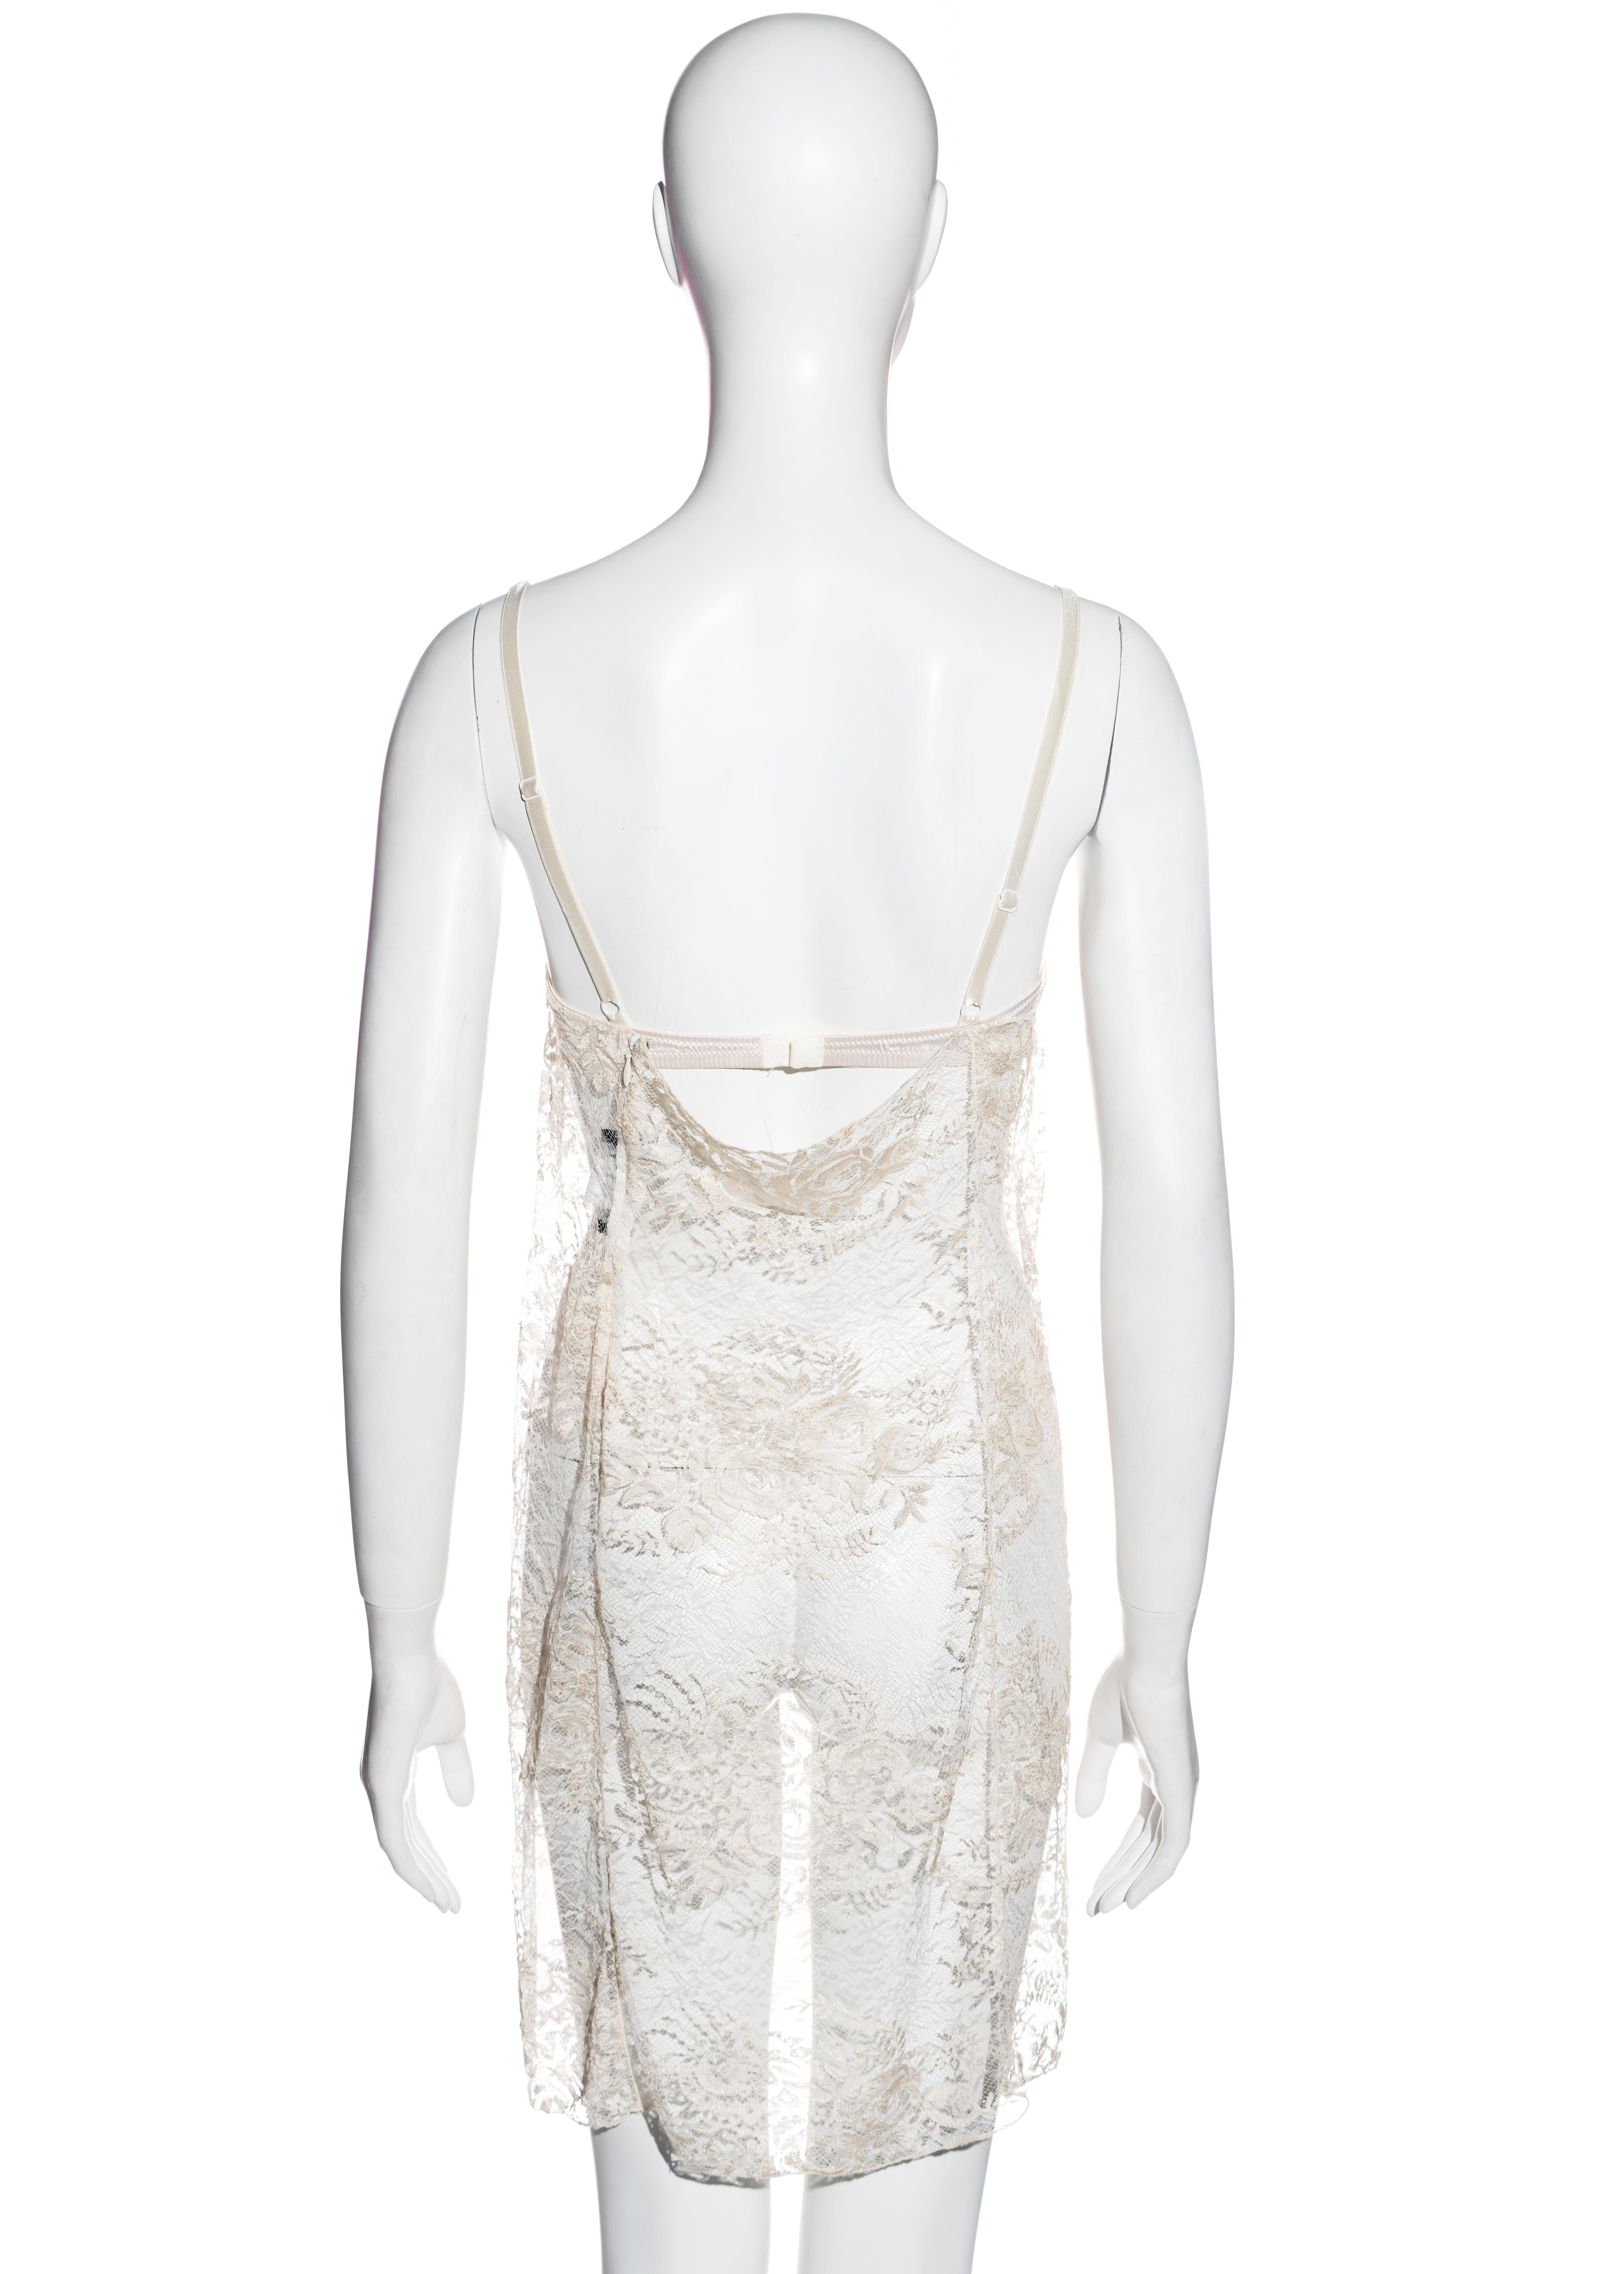 Women's Dolce & Gabbana ivory lace slip dress with attached bra, fw 2001